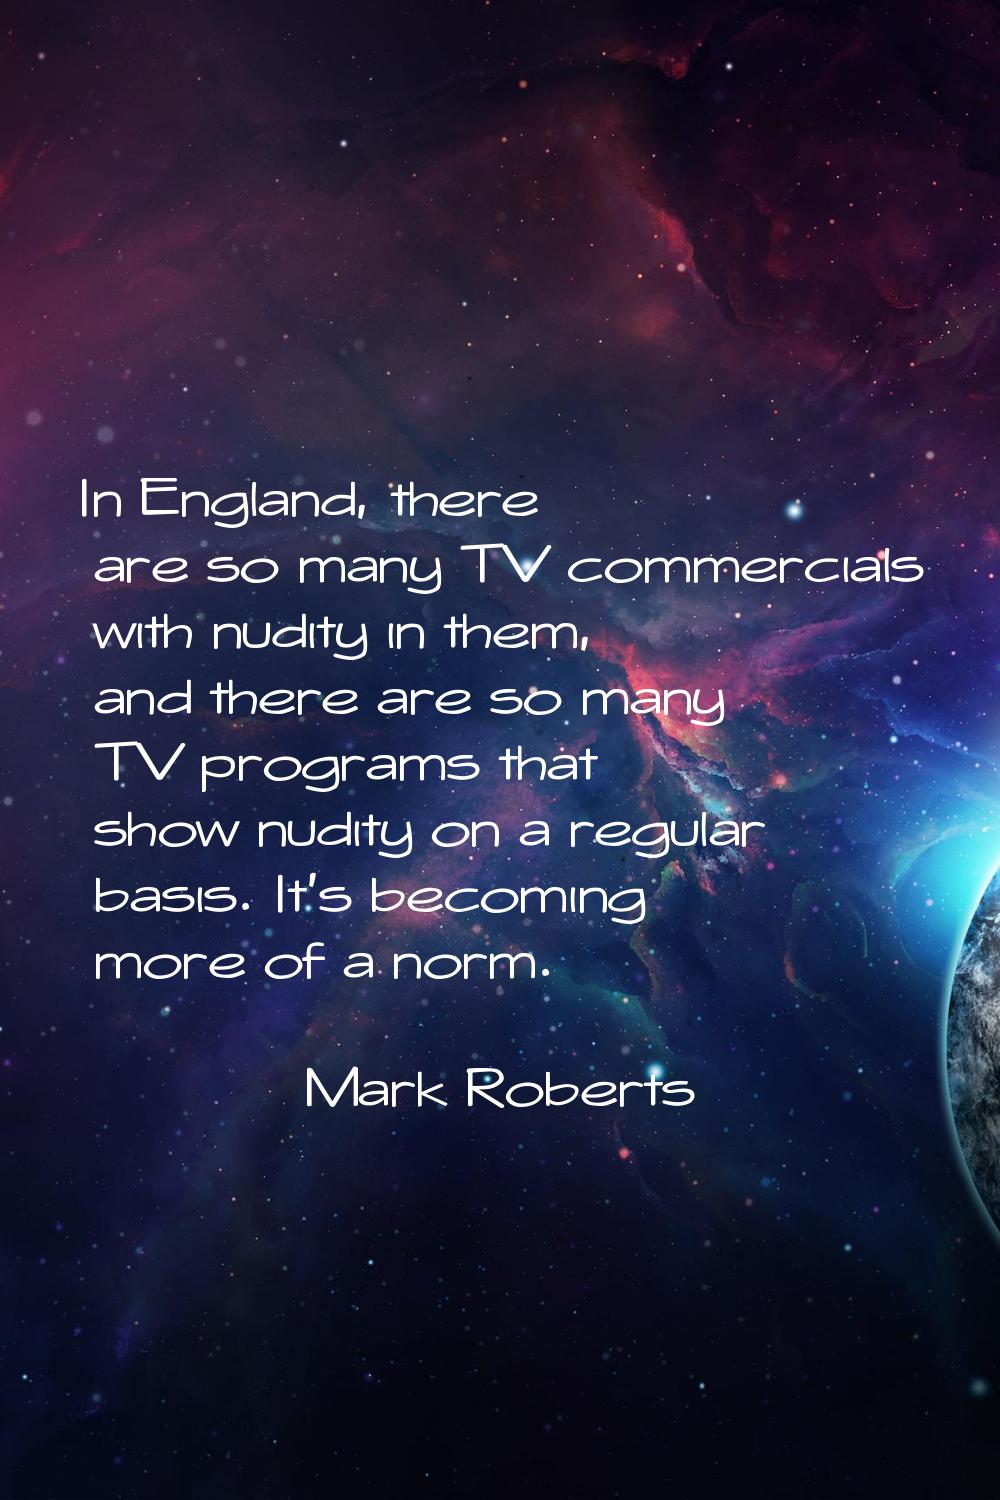 In England, there are so many TV commercials with nudity in them, and there are so many TV programs